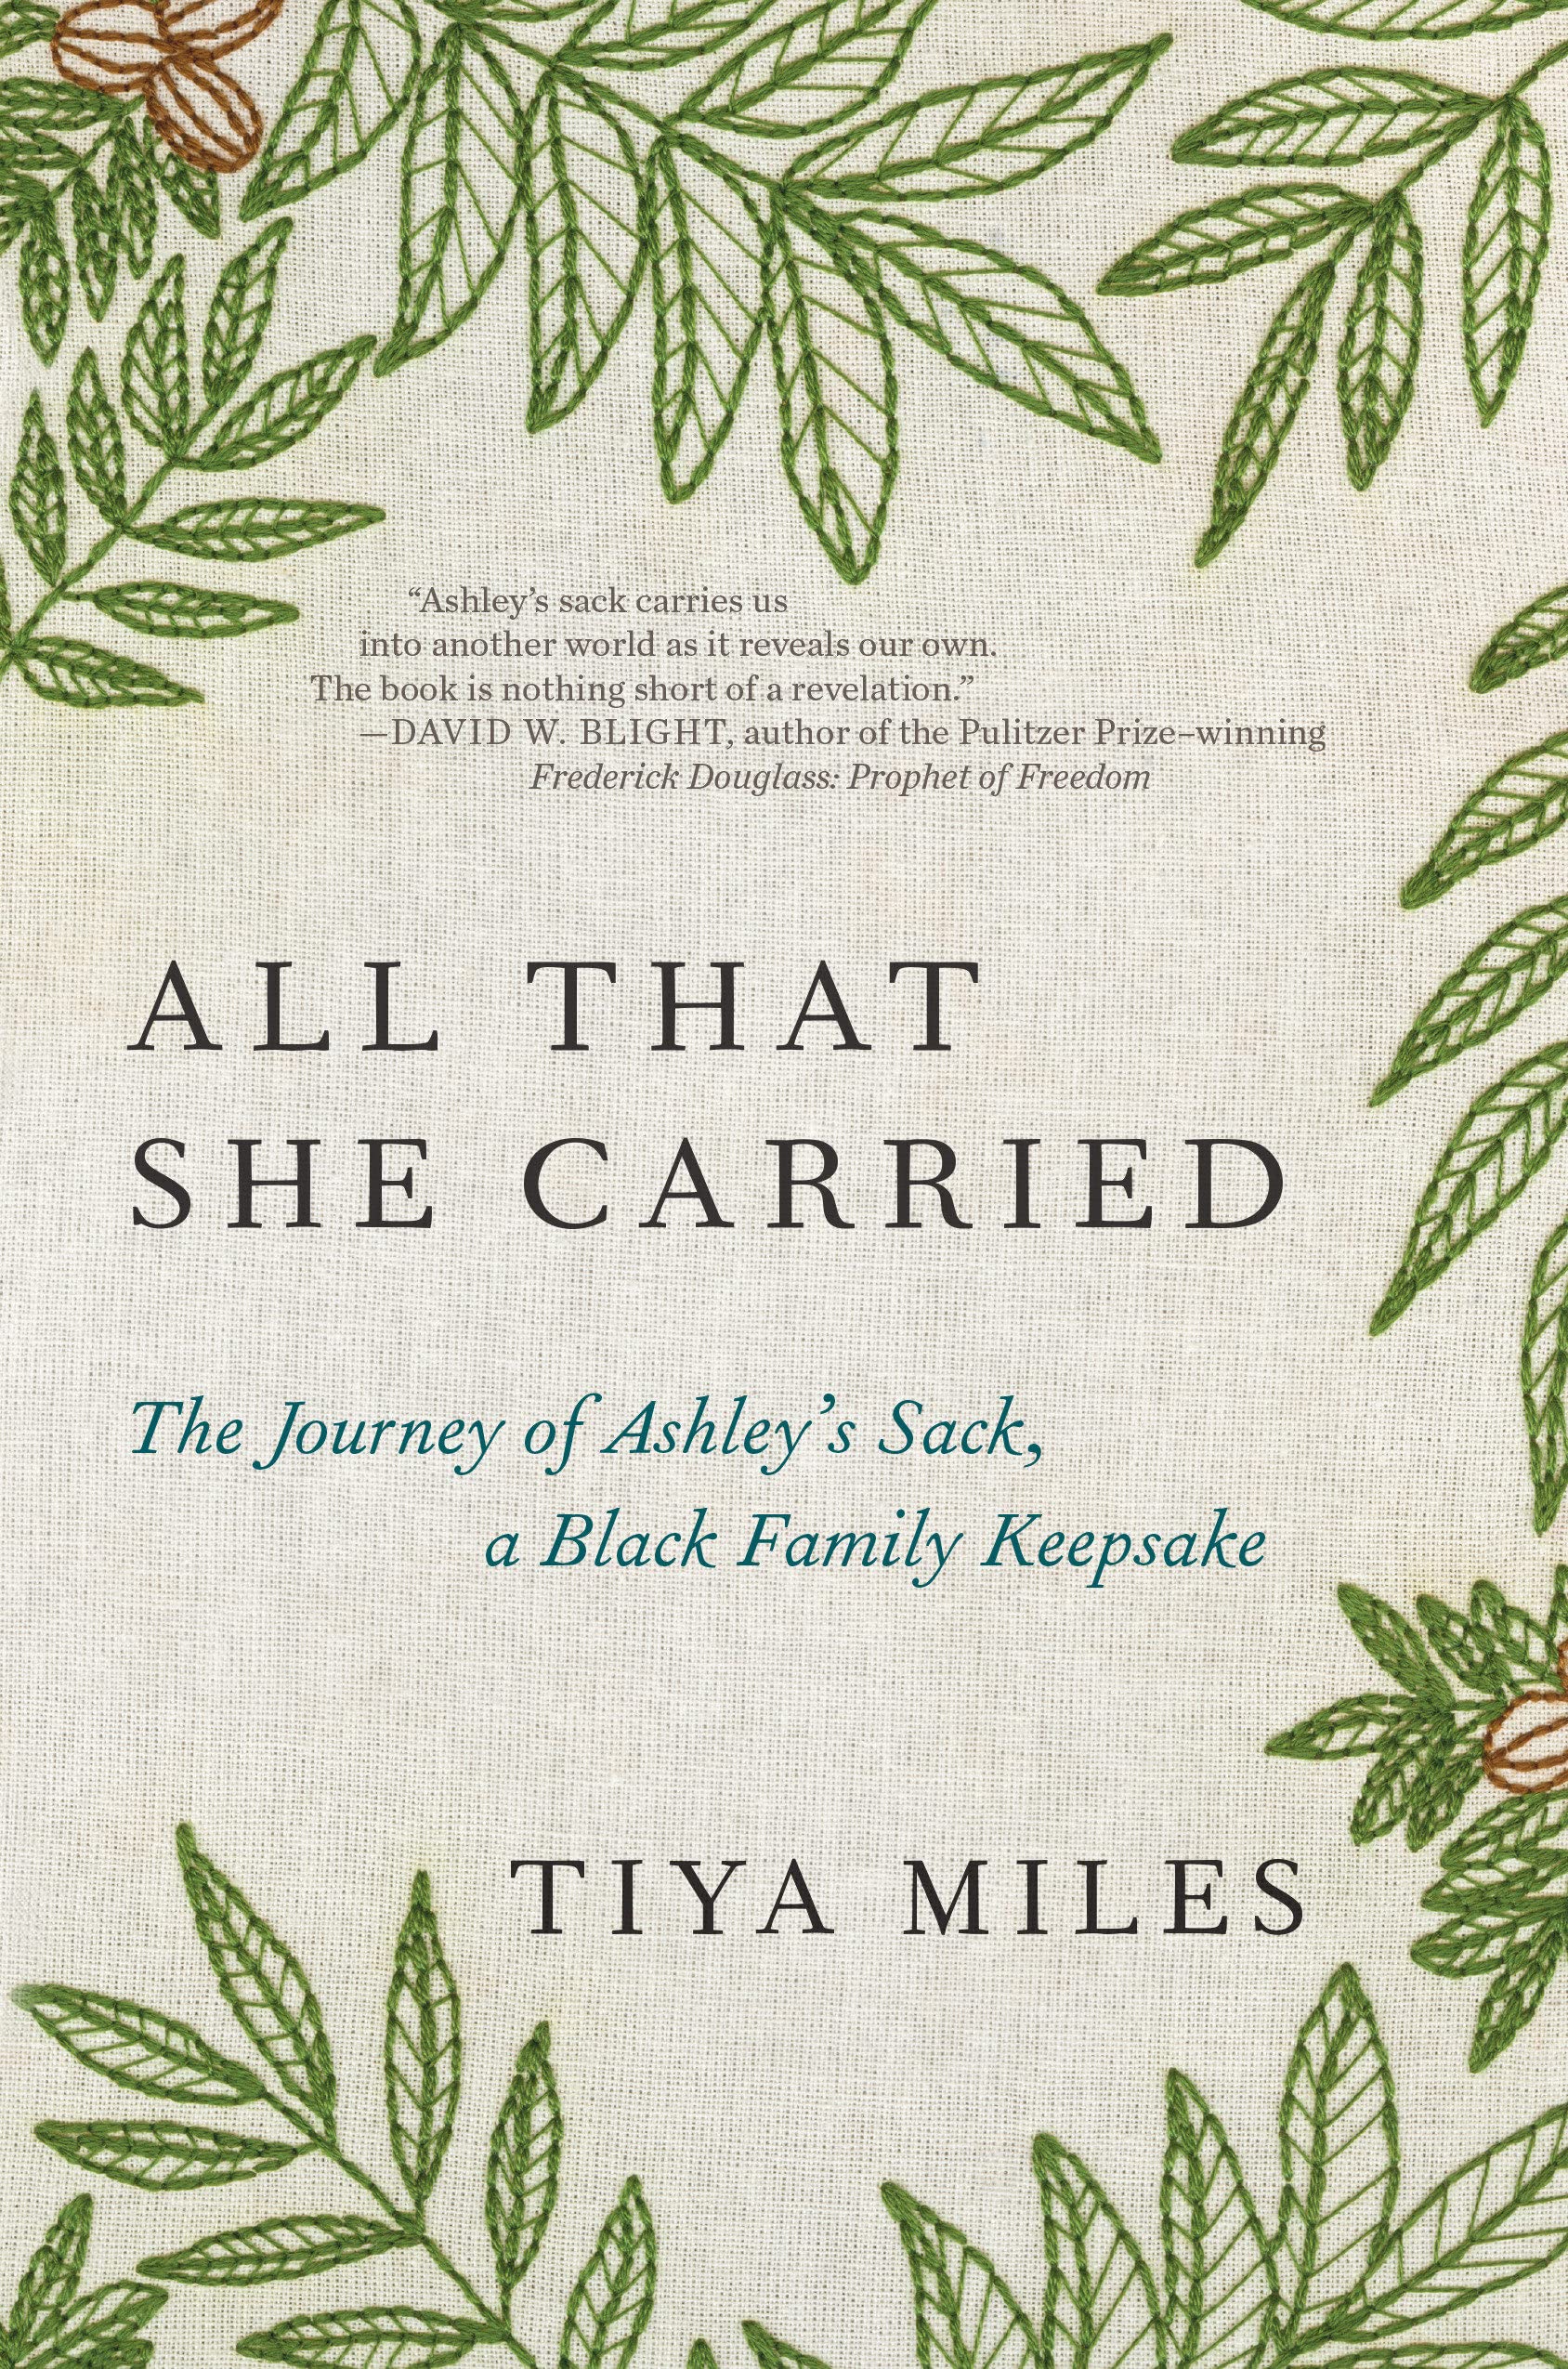 All That She Carried: The Journey of Ashley's Sack, a Black Family Keepsake Hardcover by Tiya Miles